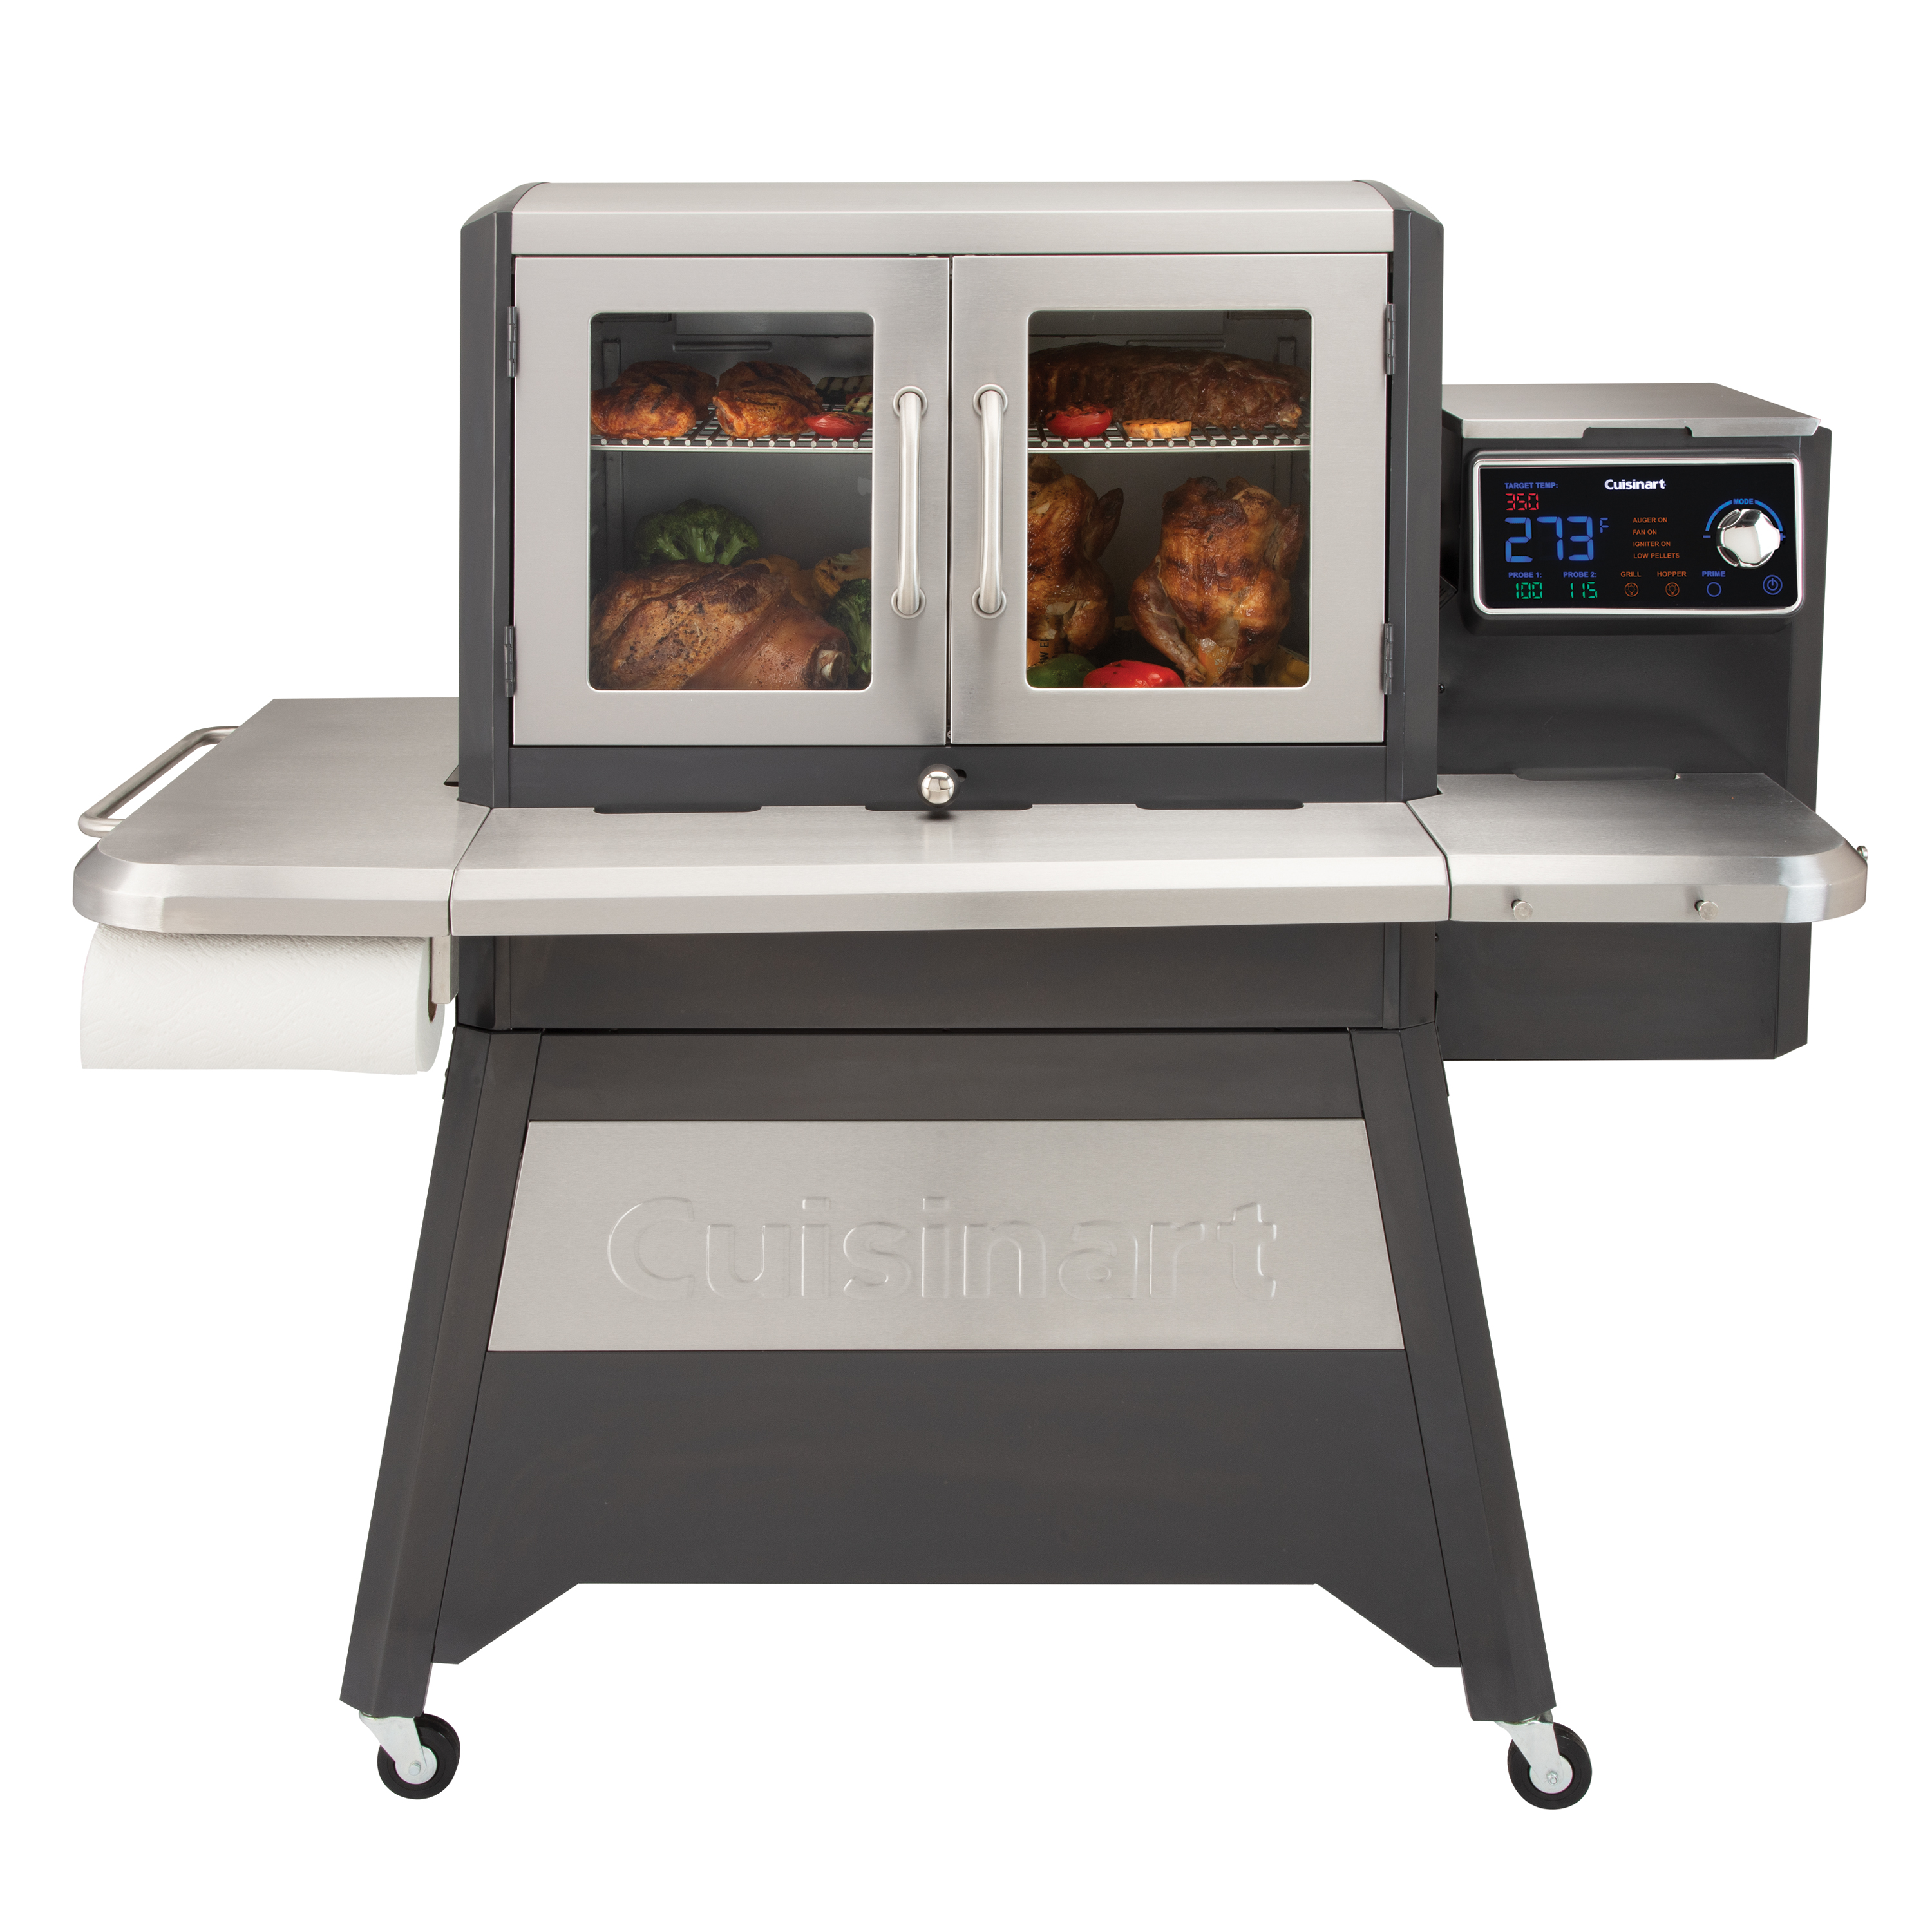 Cuisinart Clermont Pellet Grill & Smoker - image 3 of 37